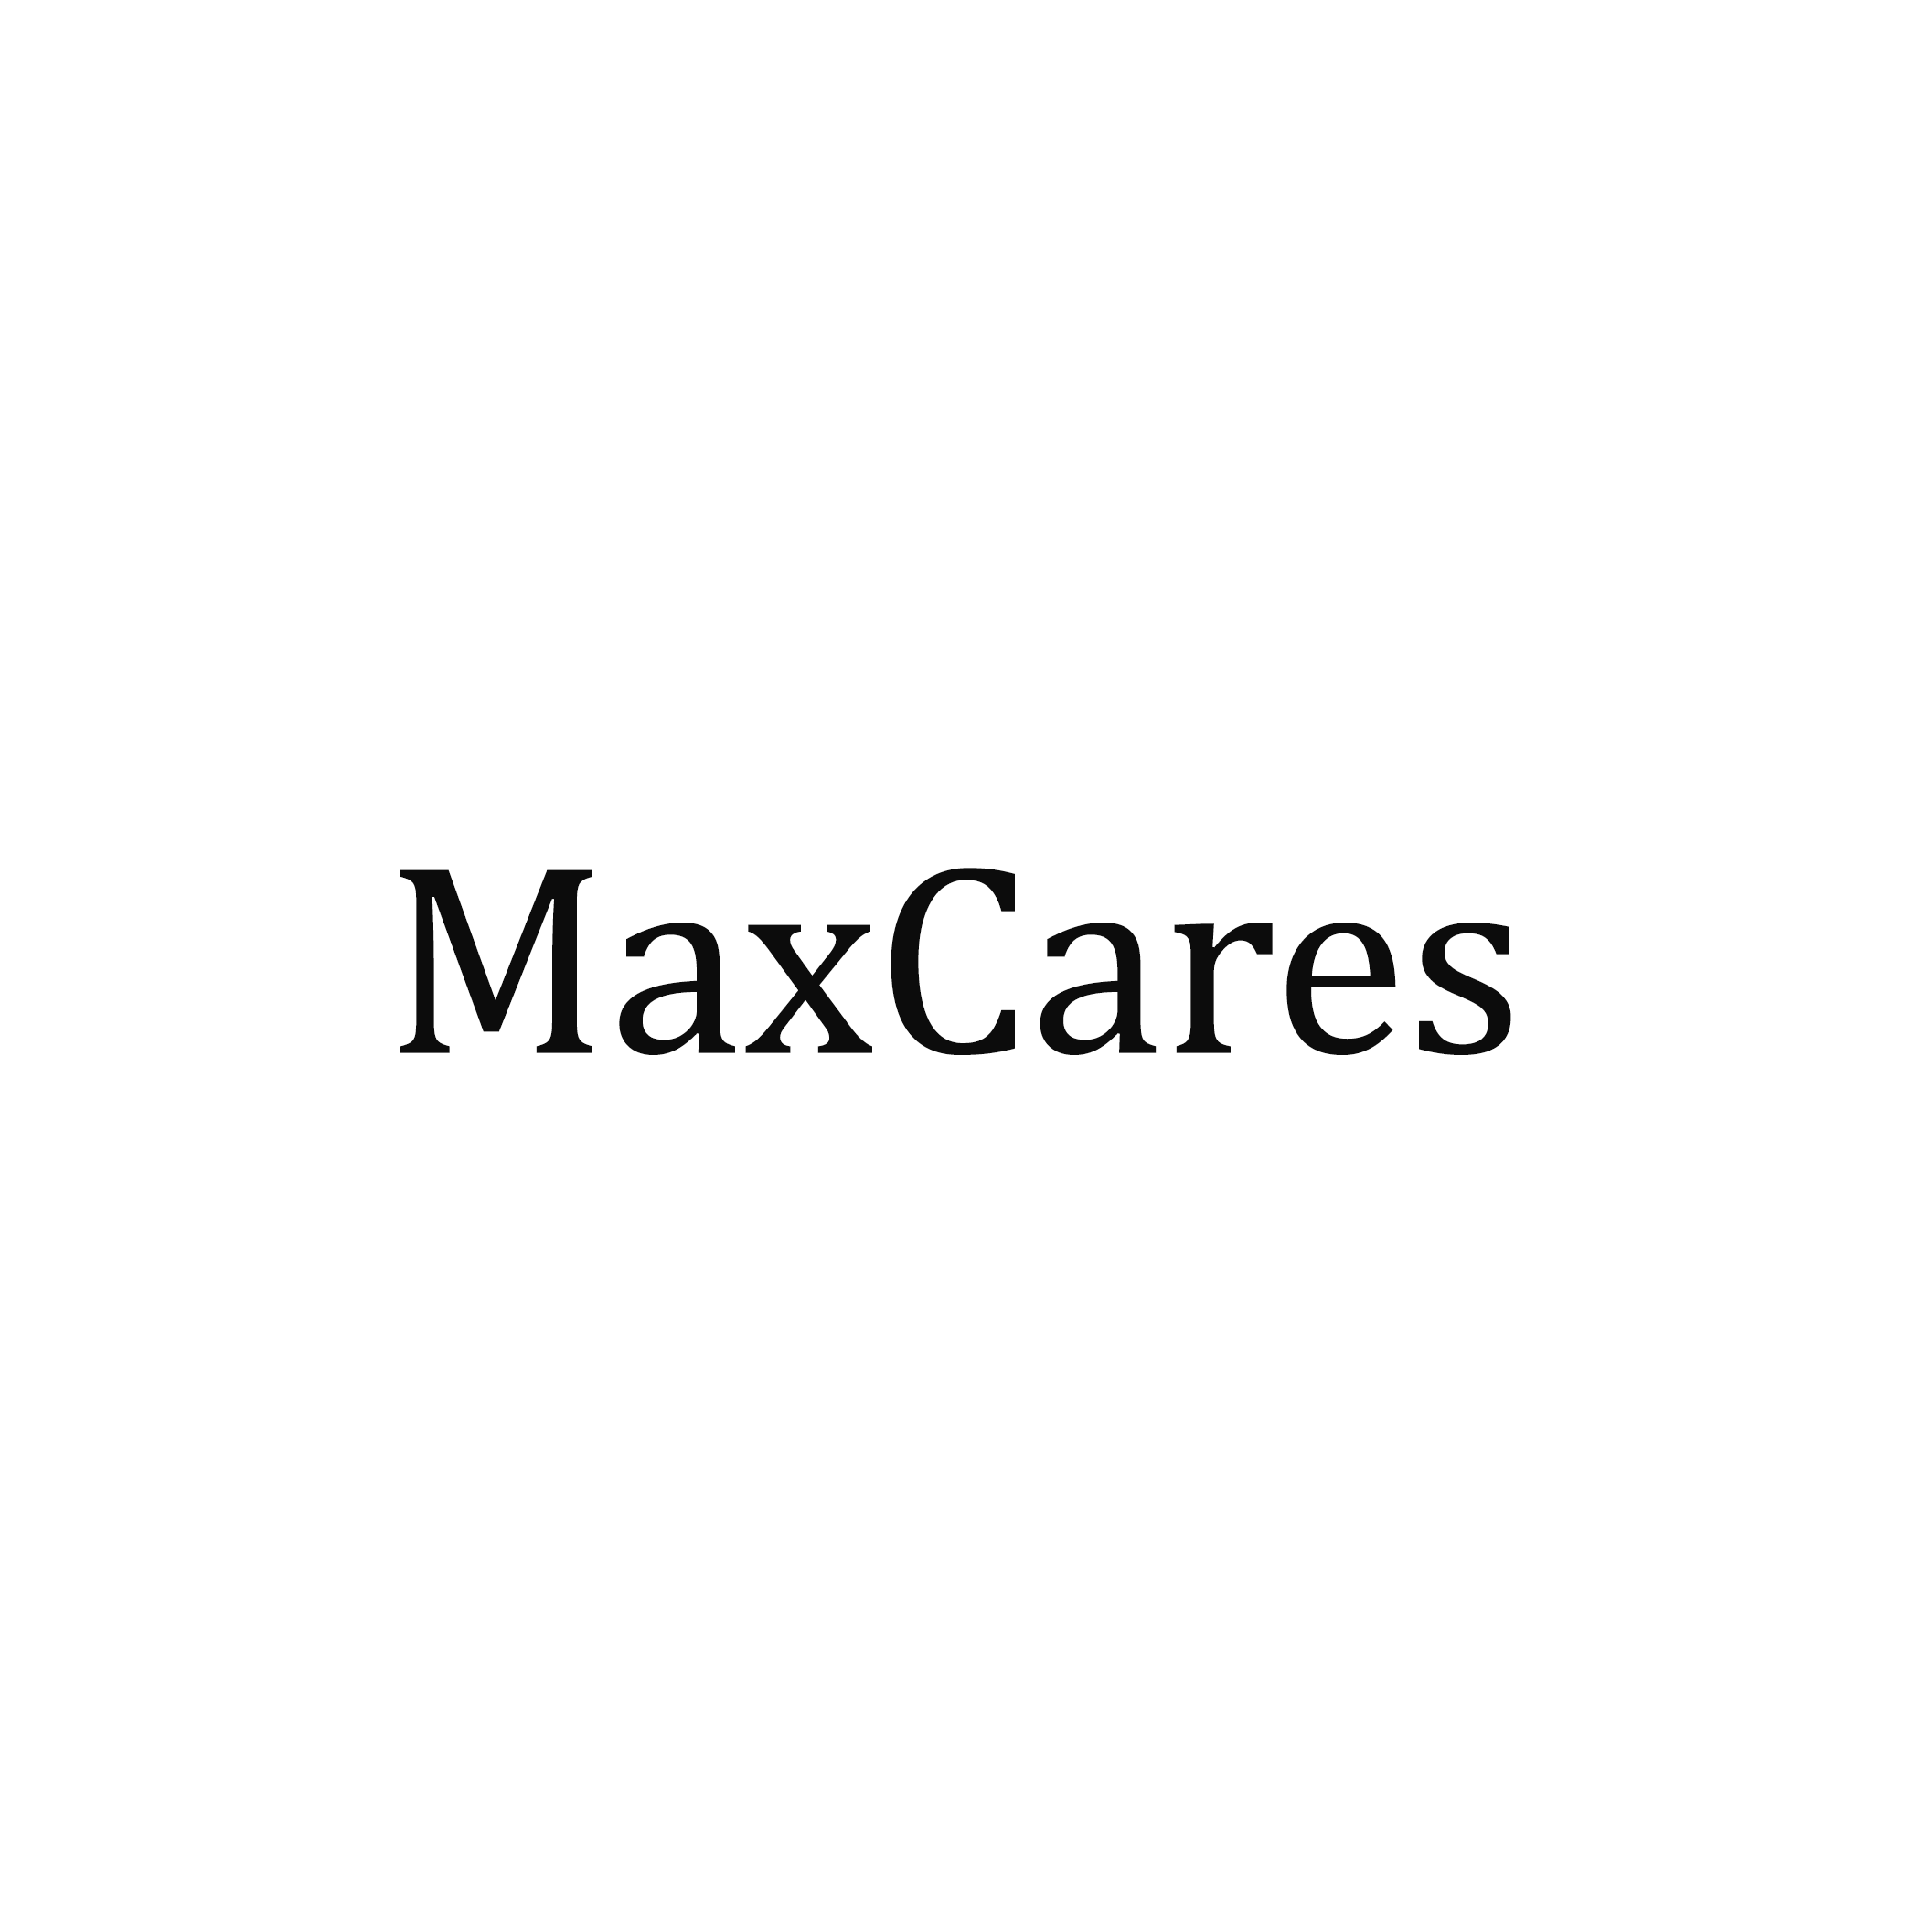 Product Brand: MaxCares